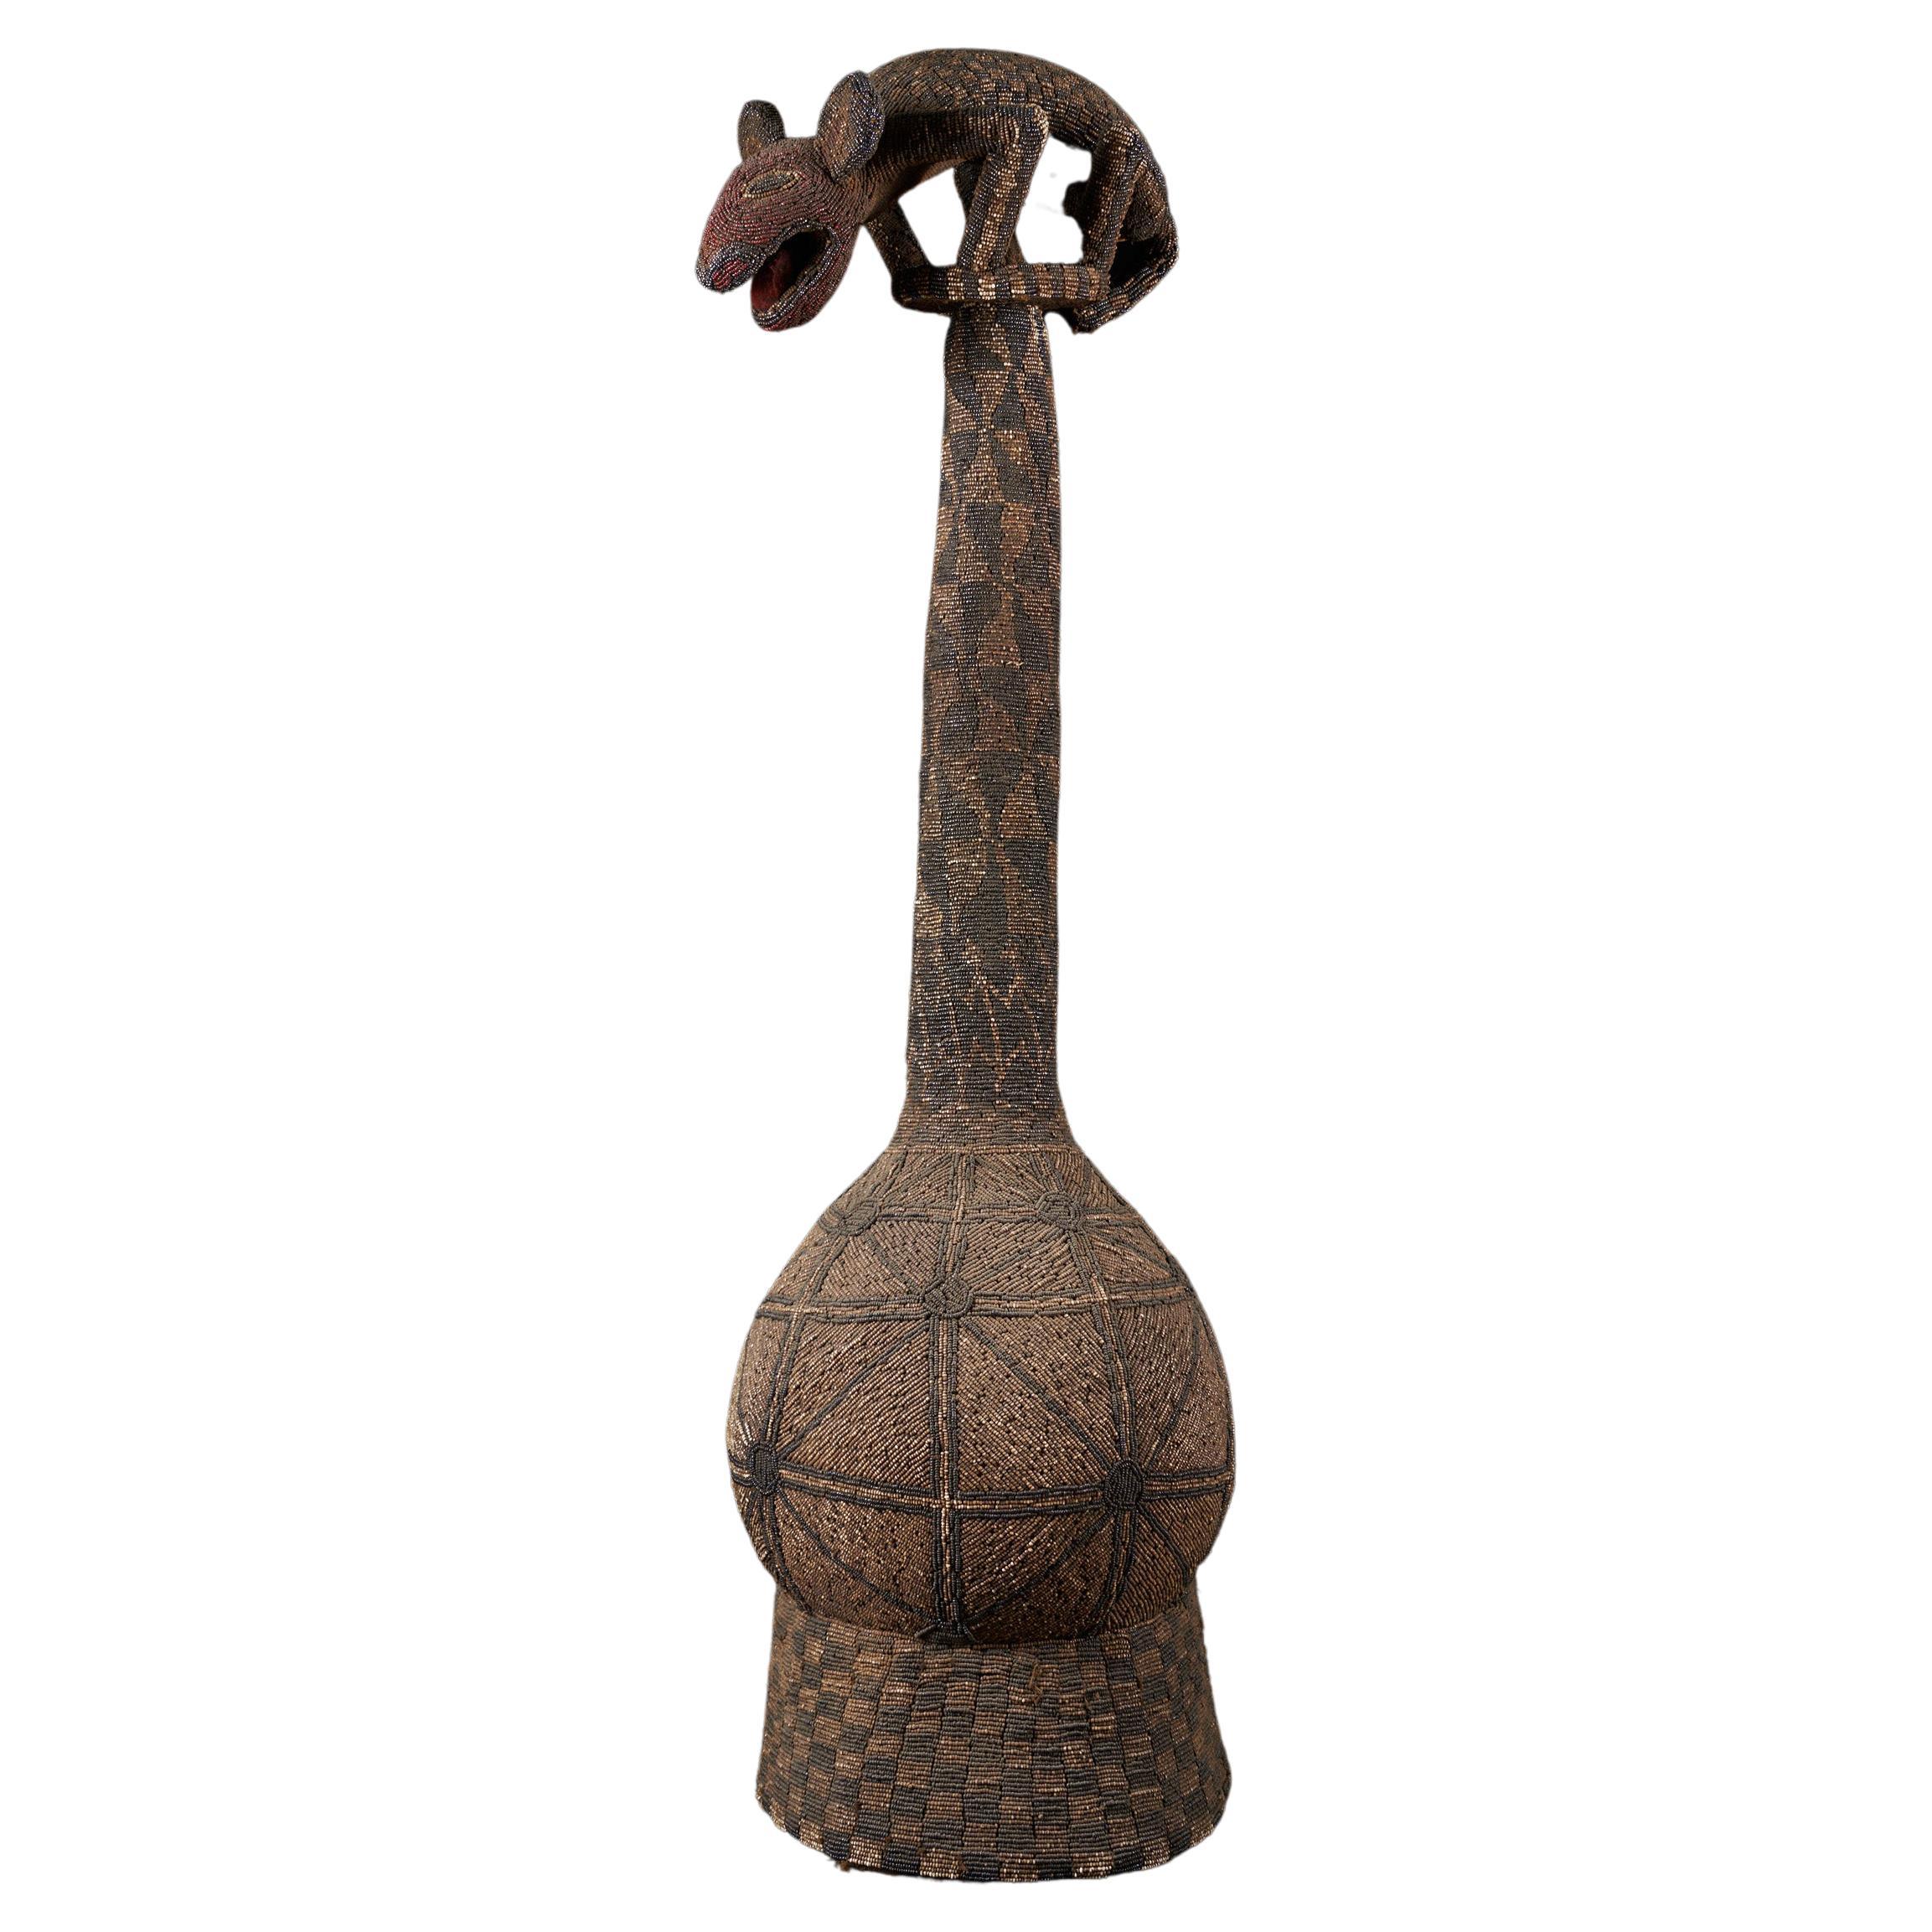 Ceremonial Palm Wine Vessel from the Cameroon Grasslands